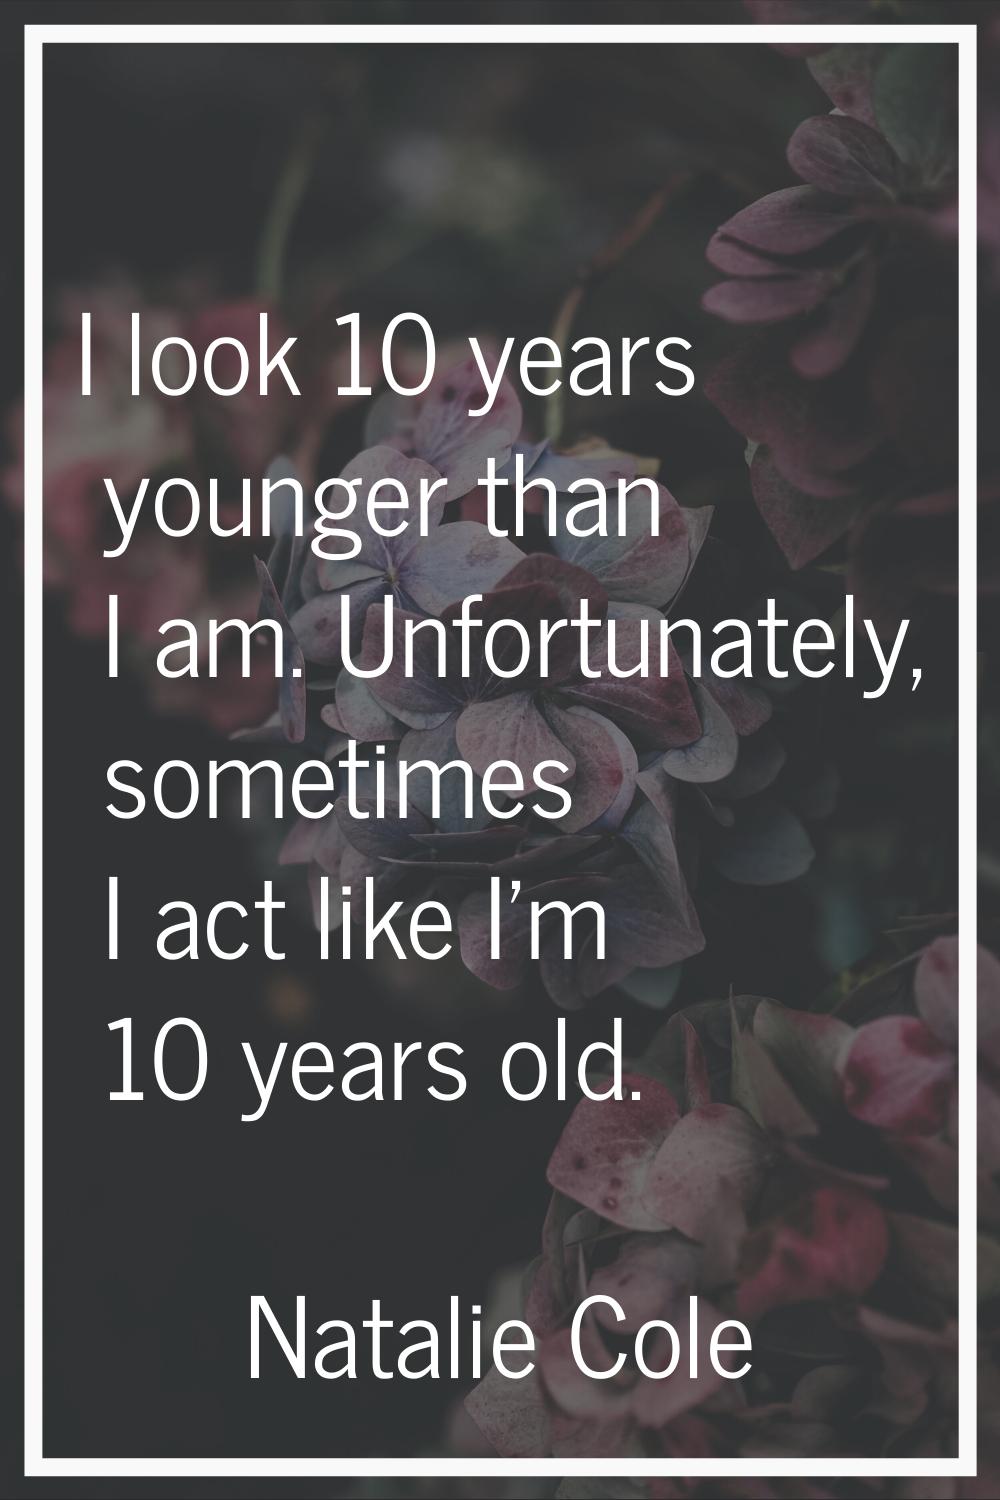 I look 10 years younger than I am. Unfortunately, sometimes I act like I'm 10 years old.